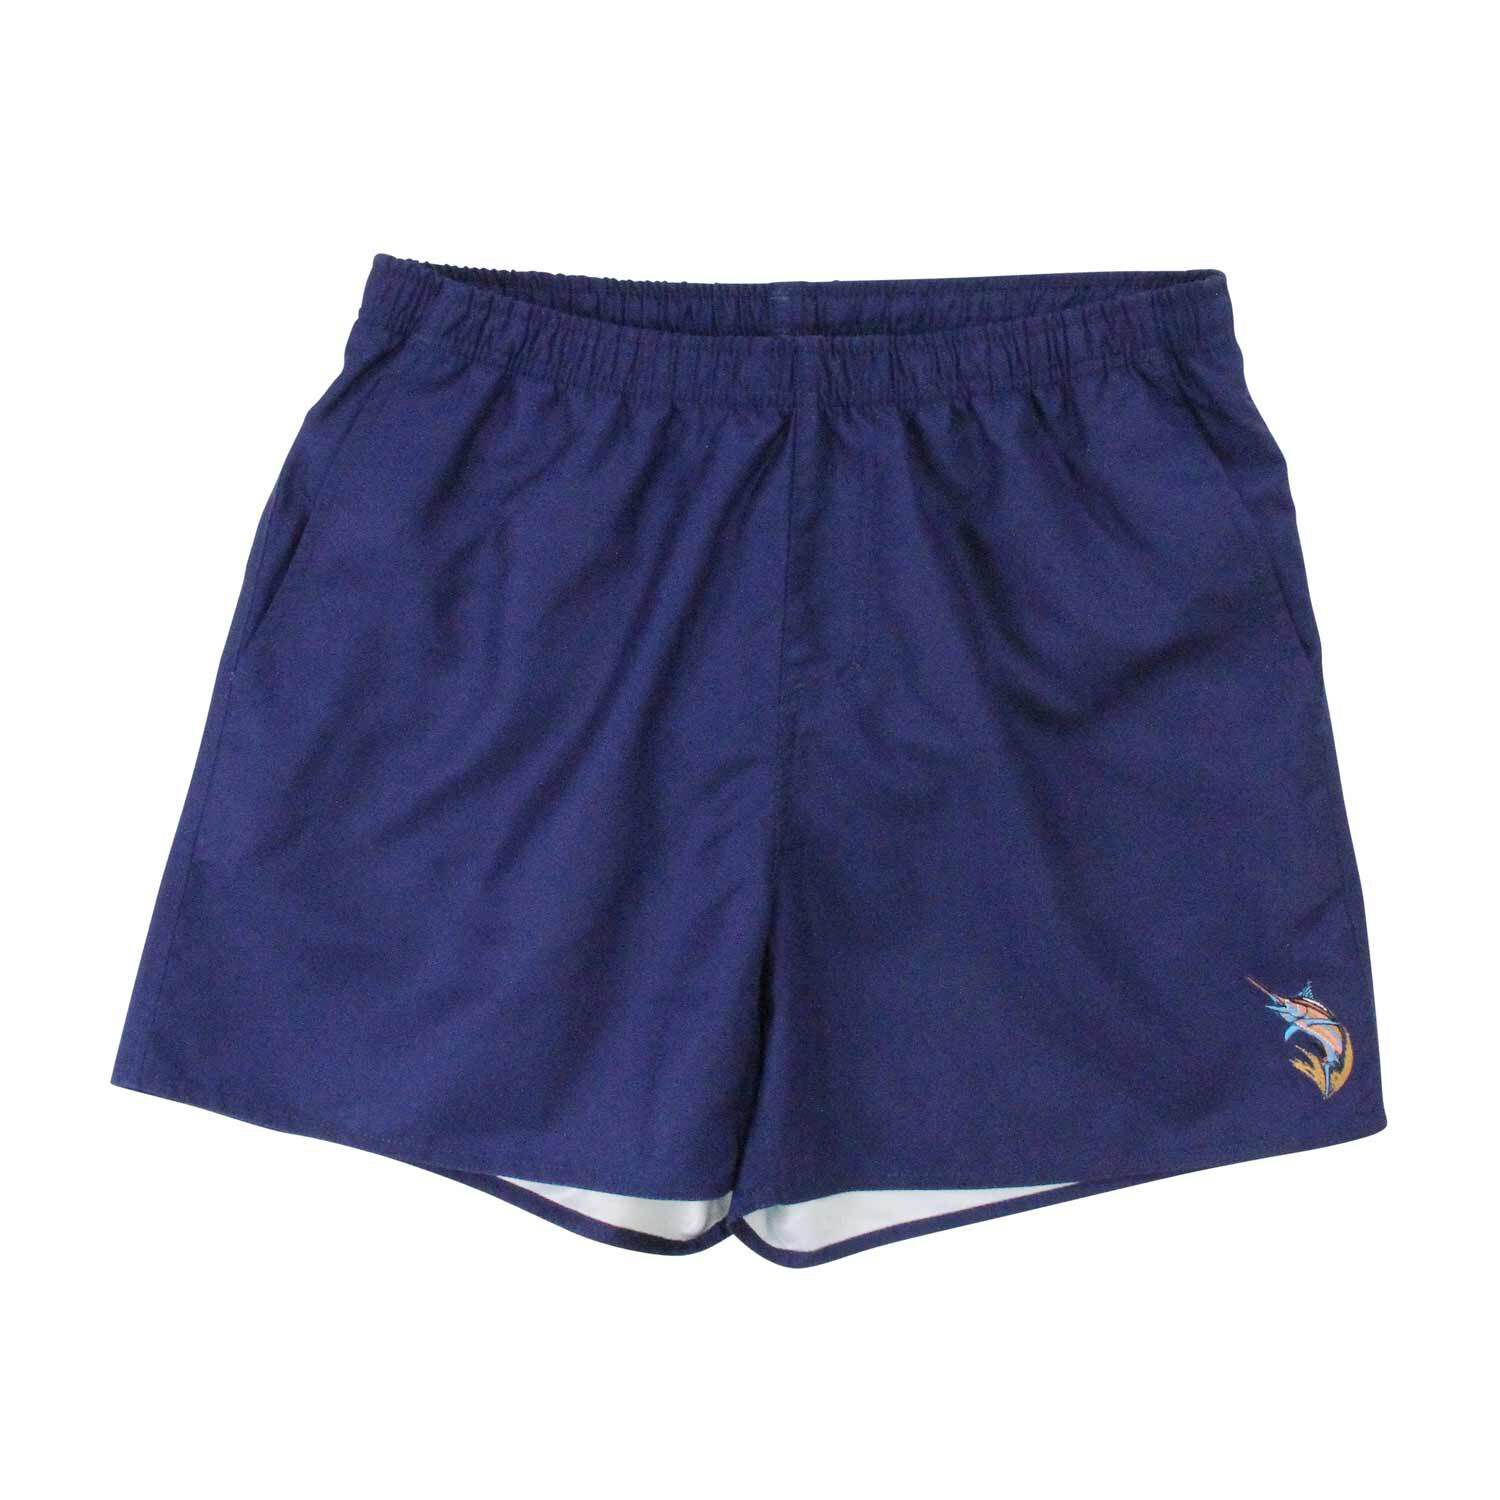 Guy Harvey Eclipse Volley Swimming Trunks Shorts-Pick Color/Size-Free Ship 